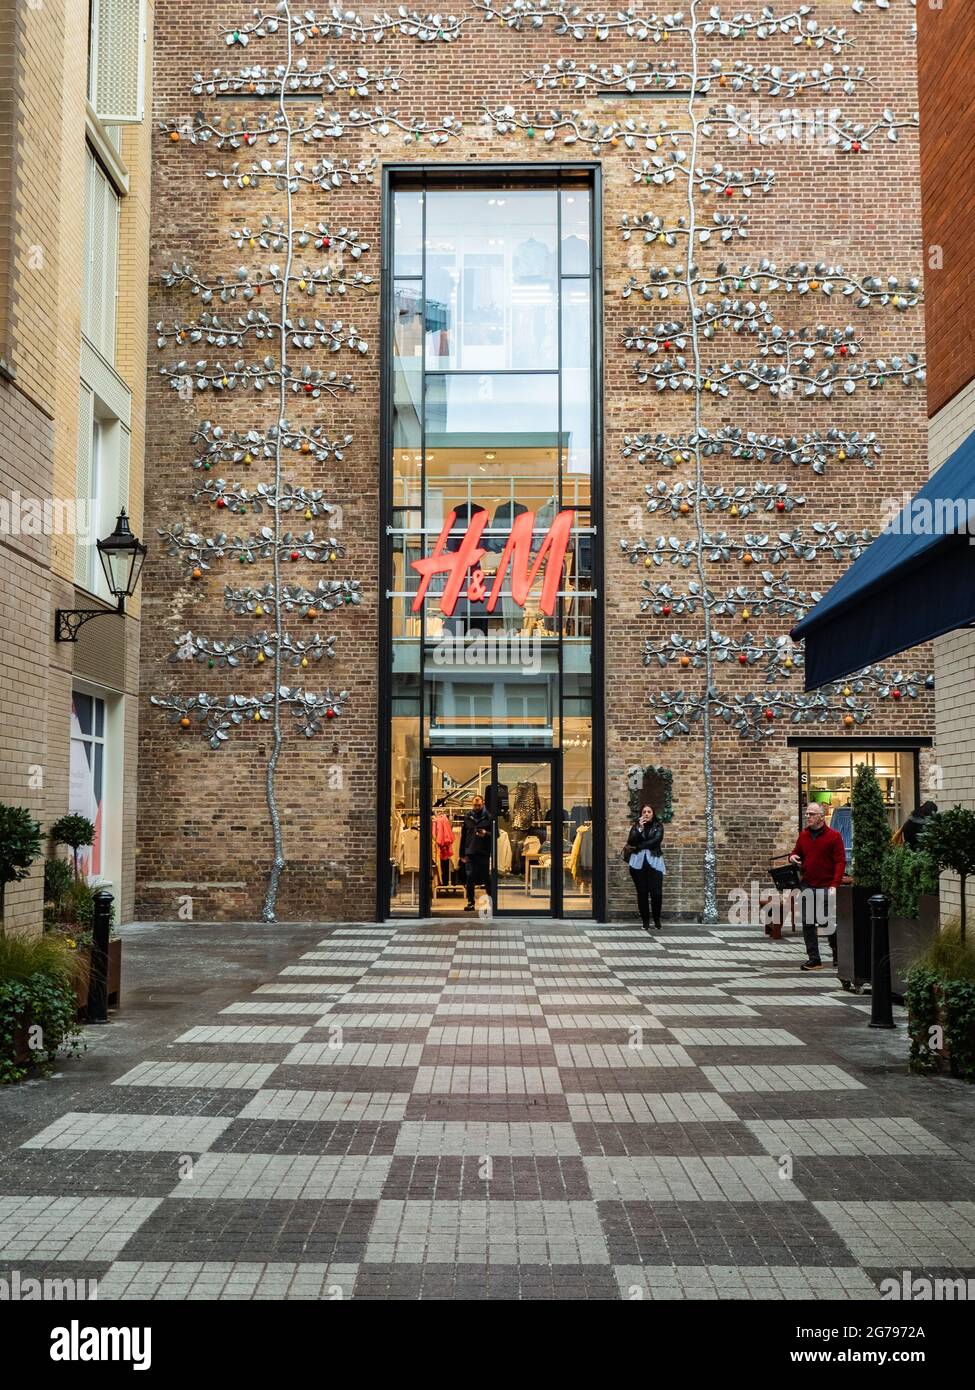 H&M Fashion Store, Seven Dials, London. The entrance and façade to the  fashion store H&M in one of London's more exclusive shopping districts  Stock Photo - Alamy